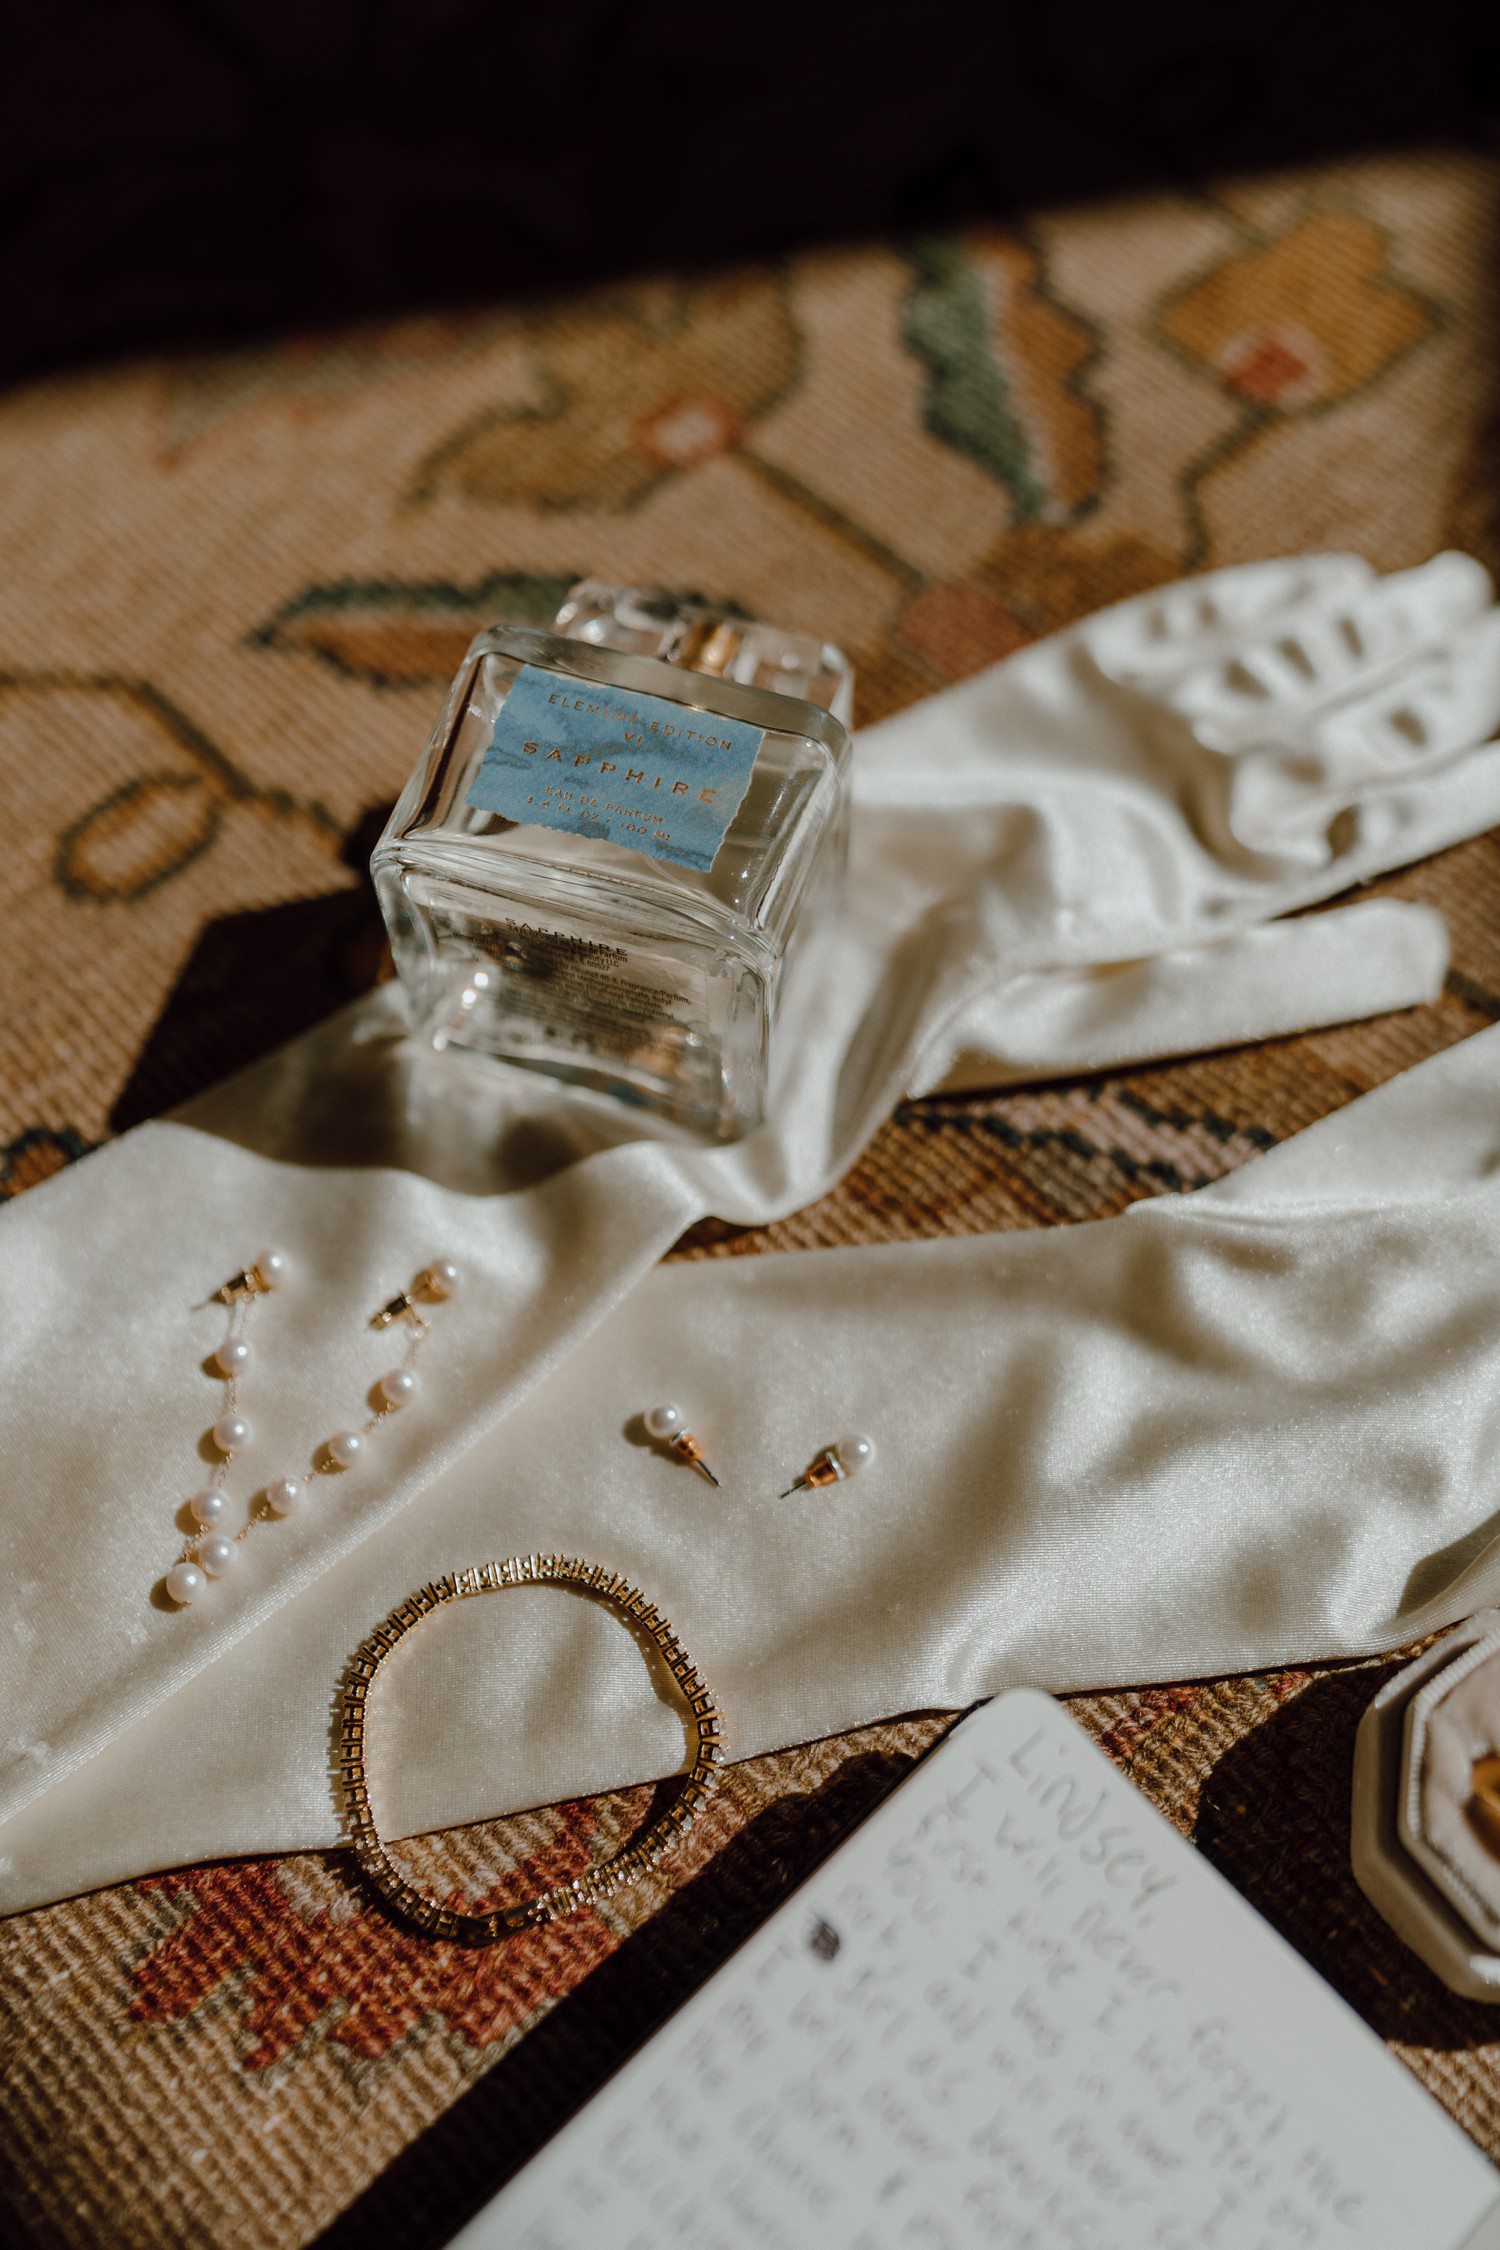 Bridal wedding details with gloves and jewelry